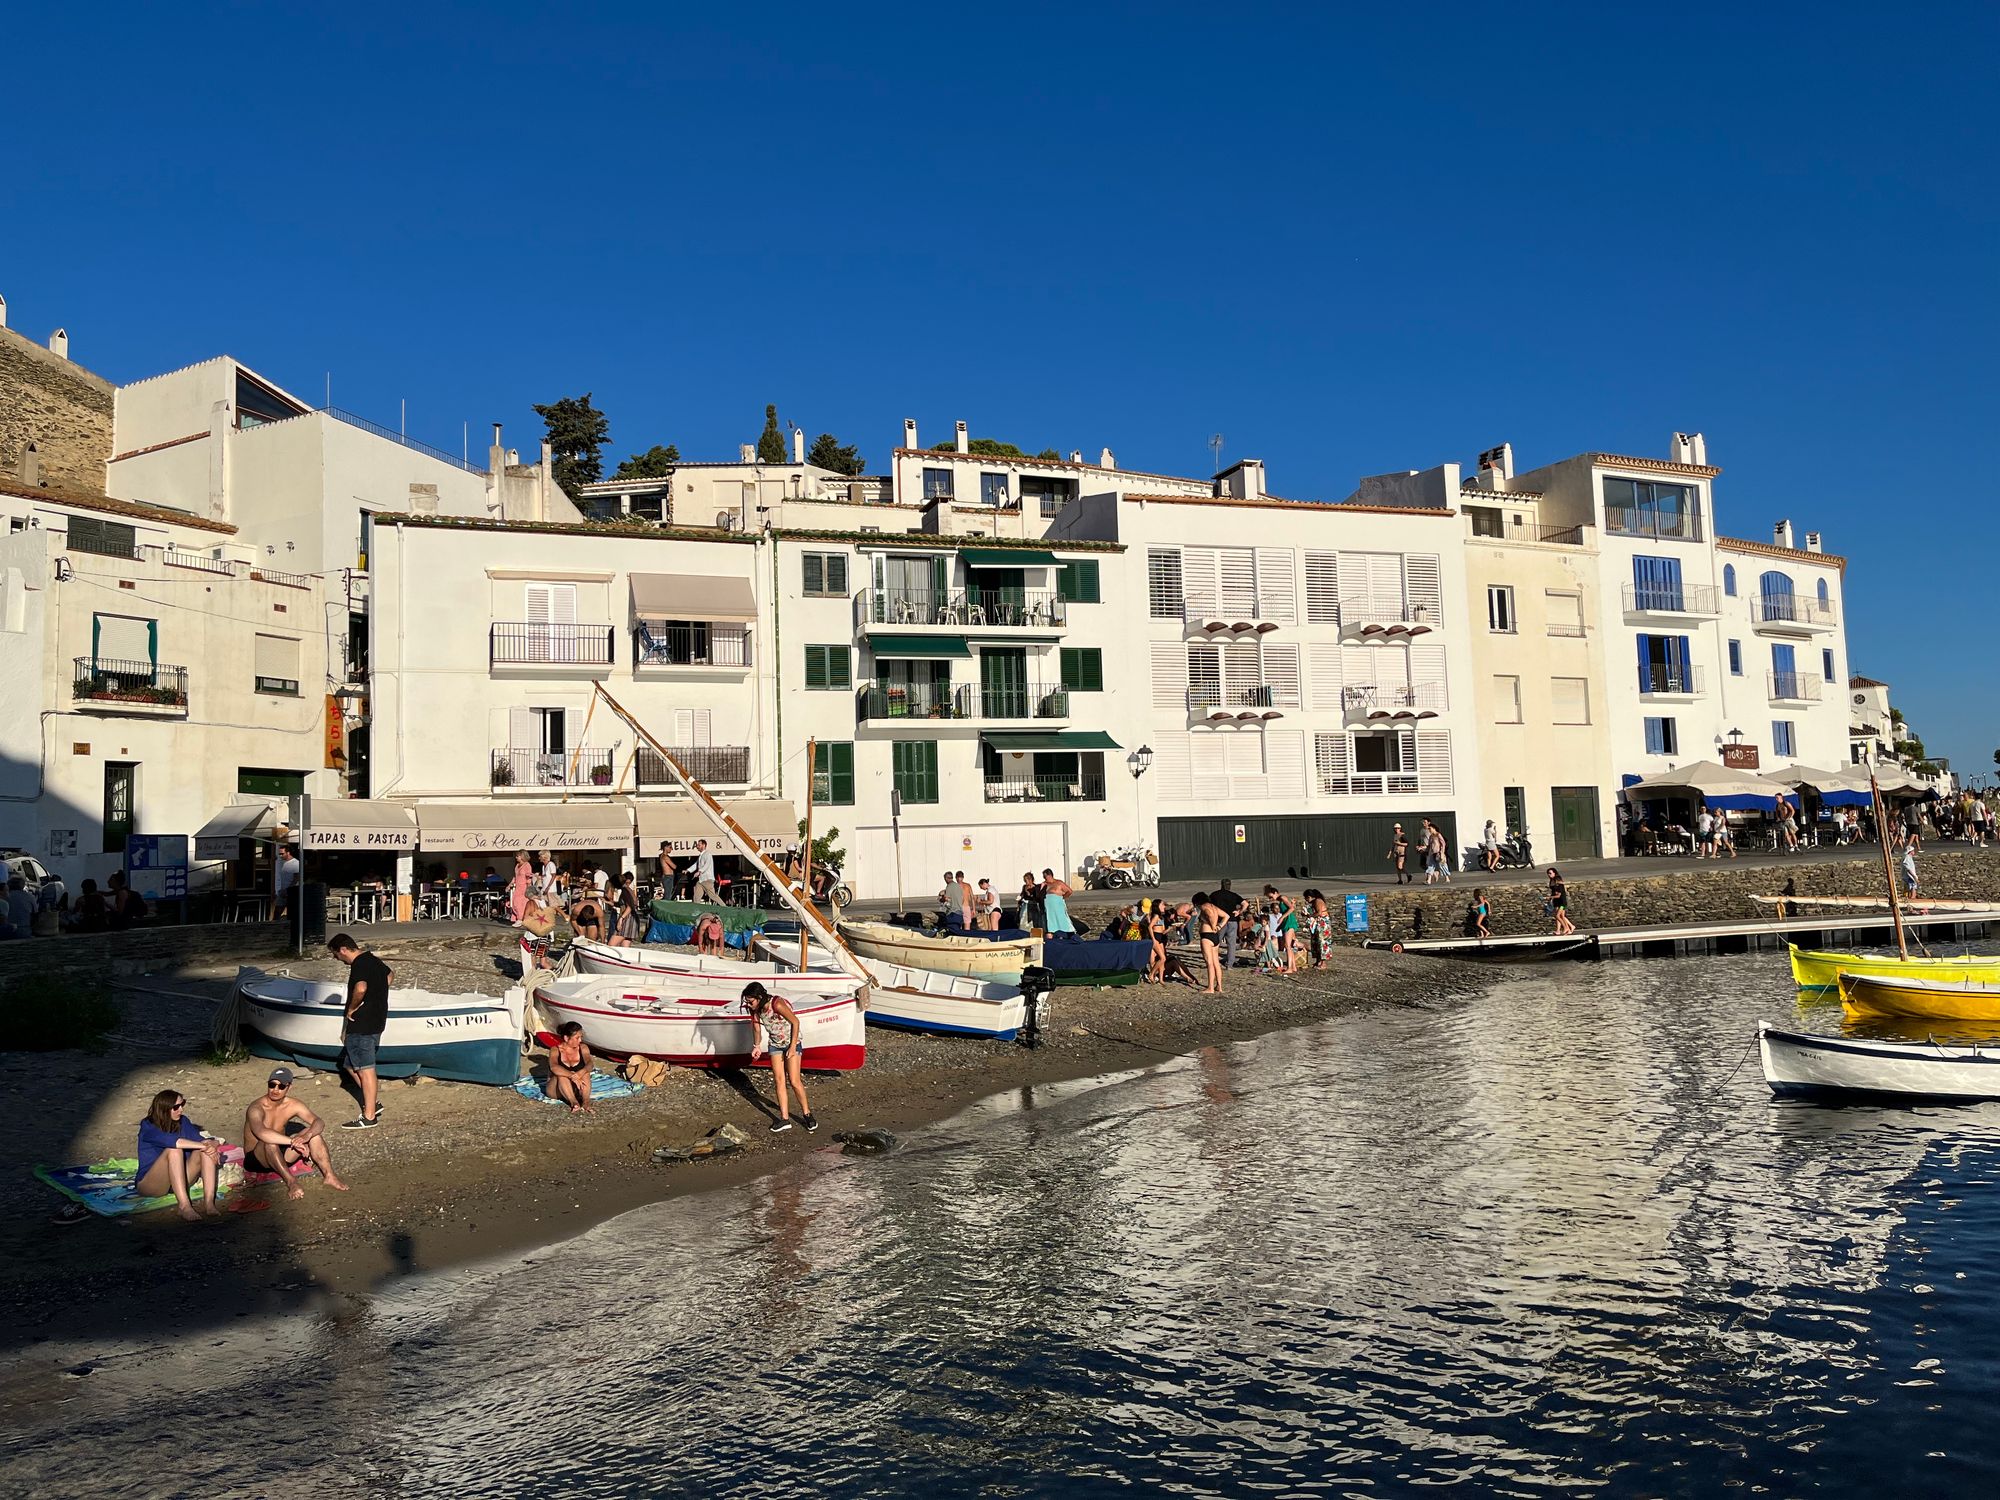 white buildings on the bay front, colorful boats and people are on the shore